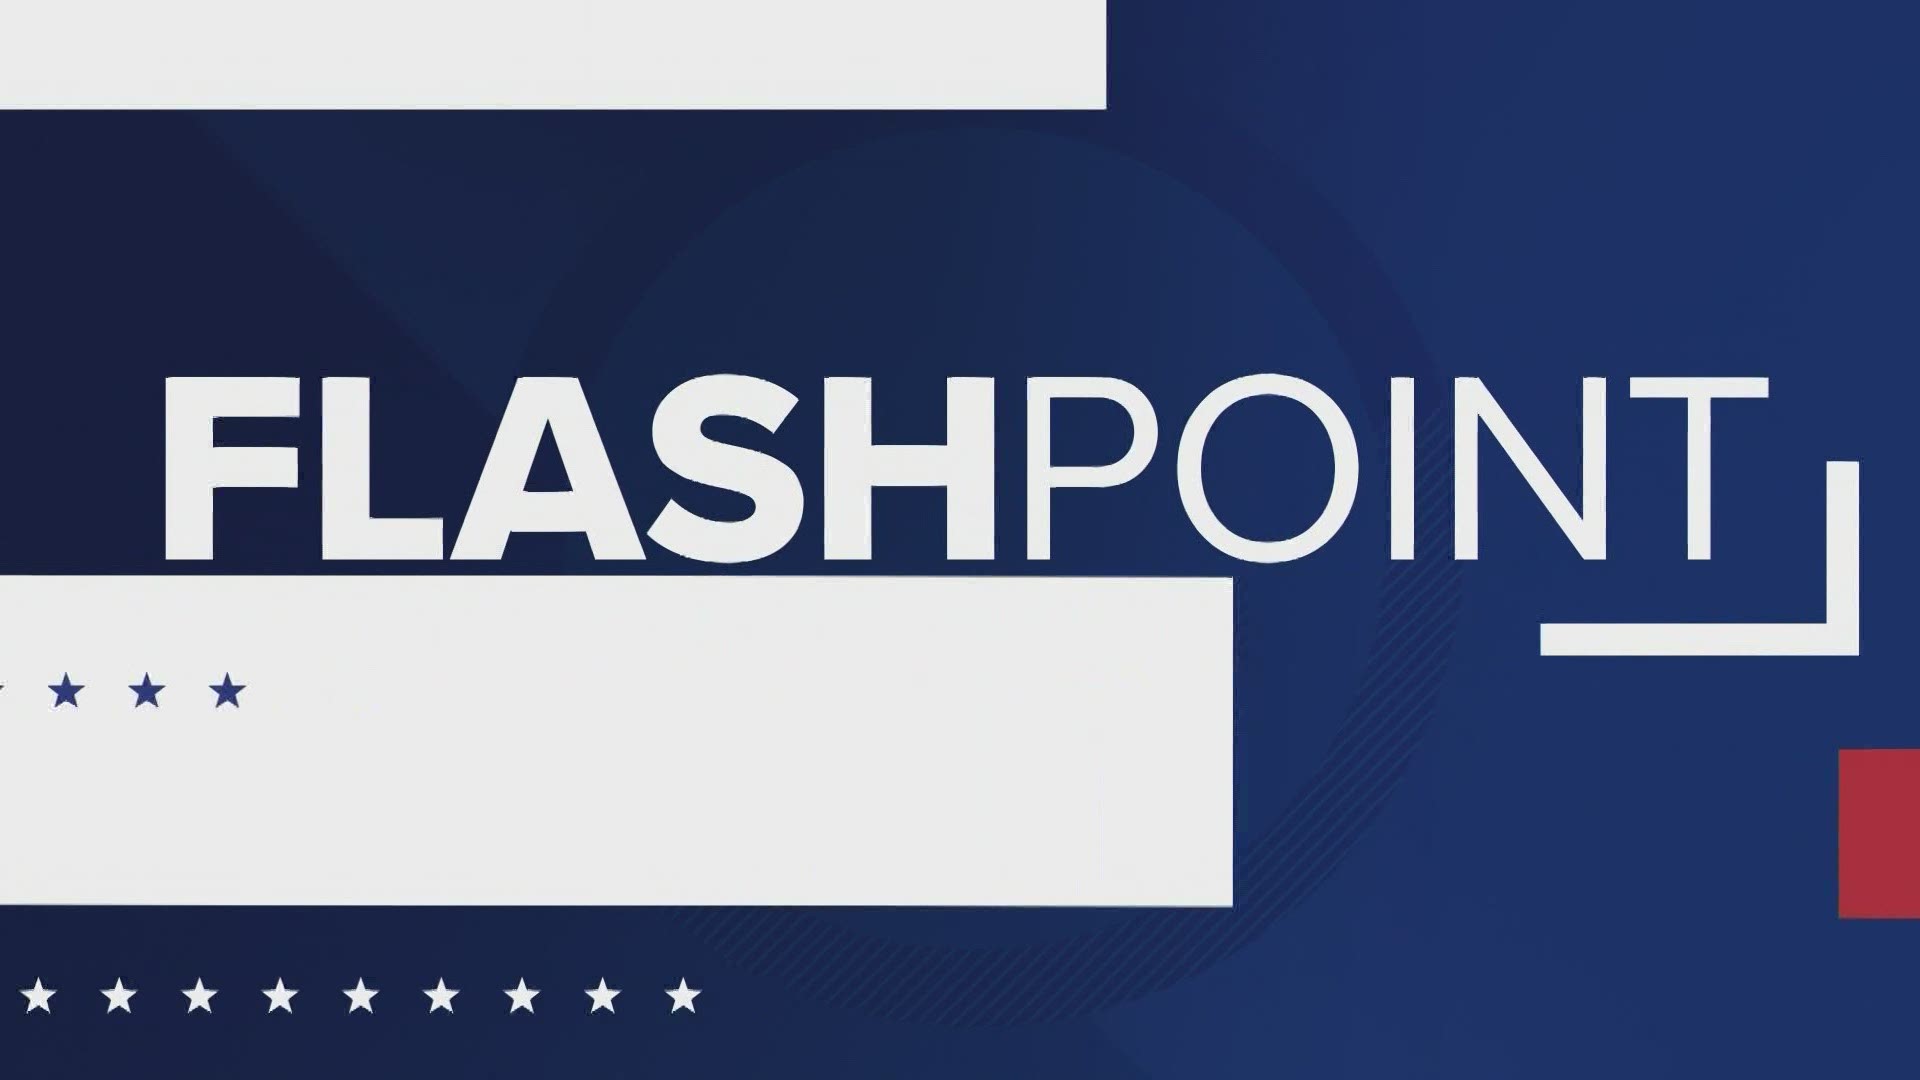 Flashpoint 11/8: Davidson Political Science Professor, Susan Roberts discusses where the parties go from here and lessons they can learn from the 2020 election.